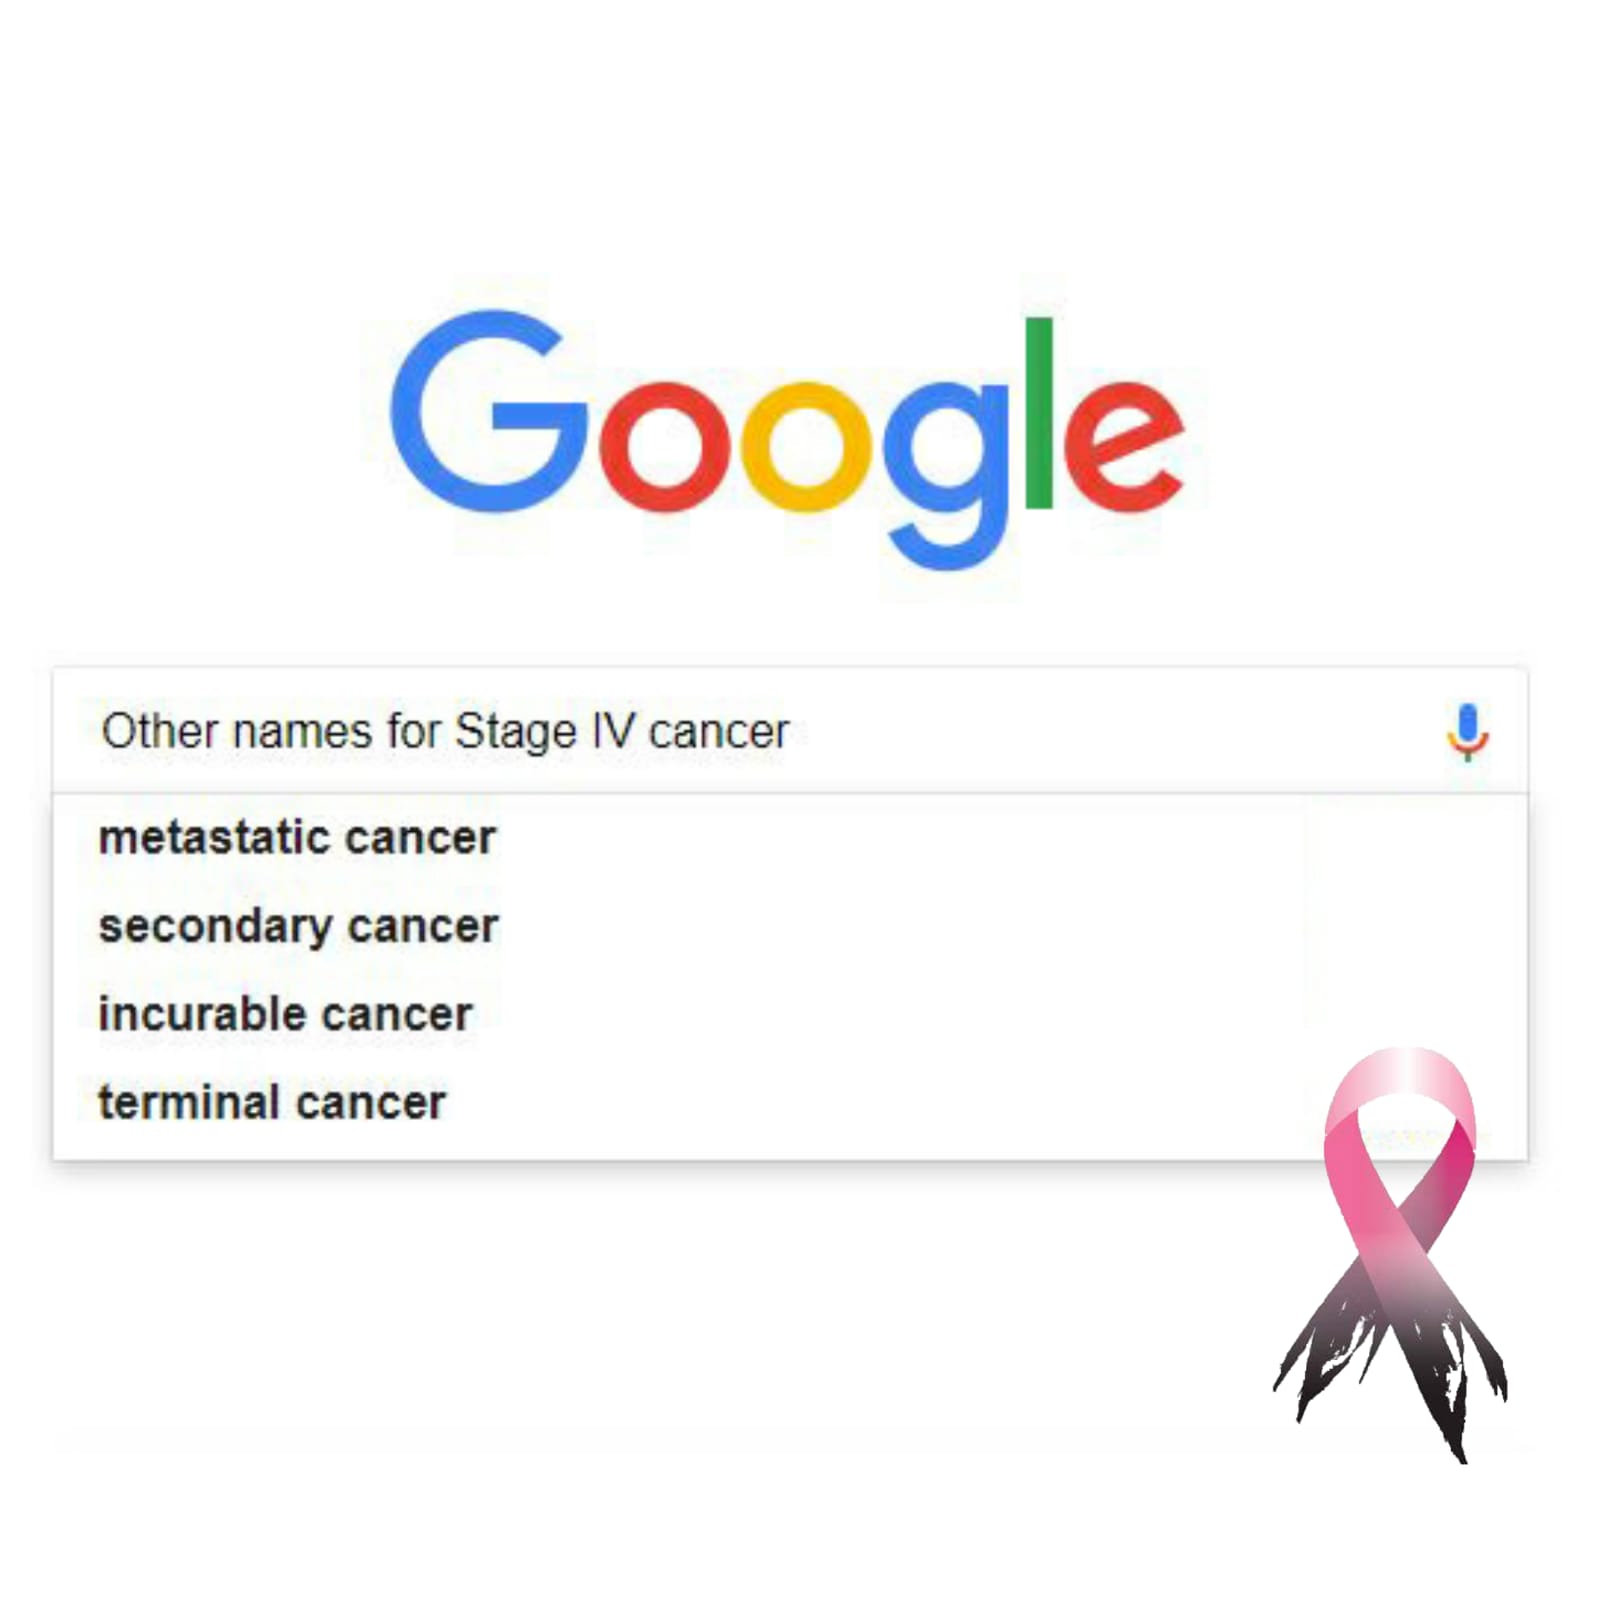 Google Search for metastatic, secondary cancer